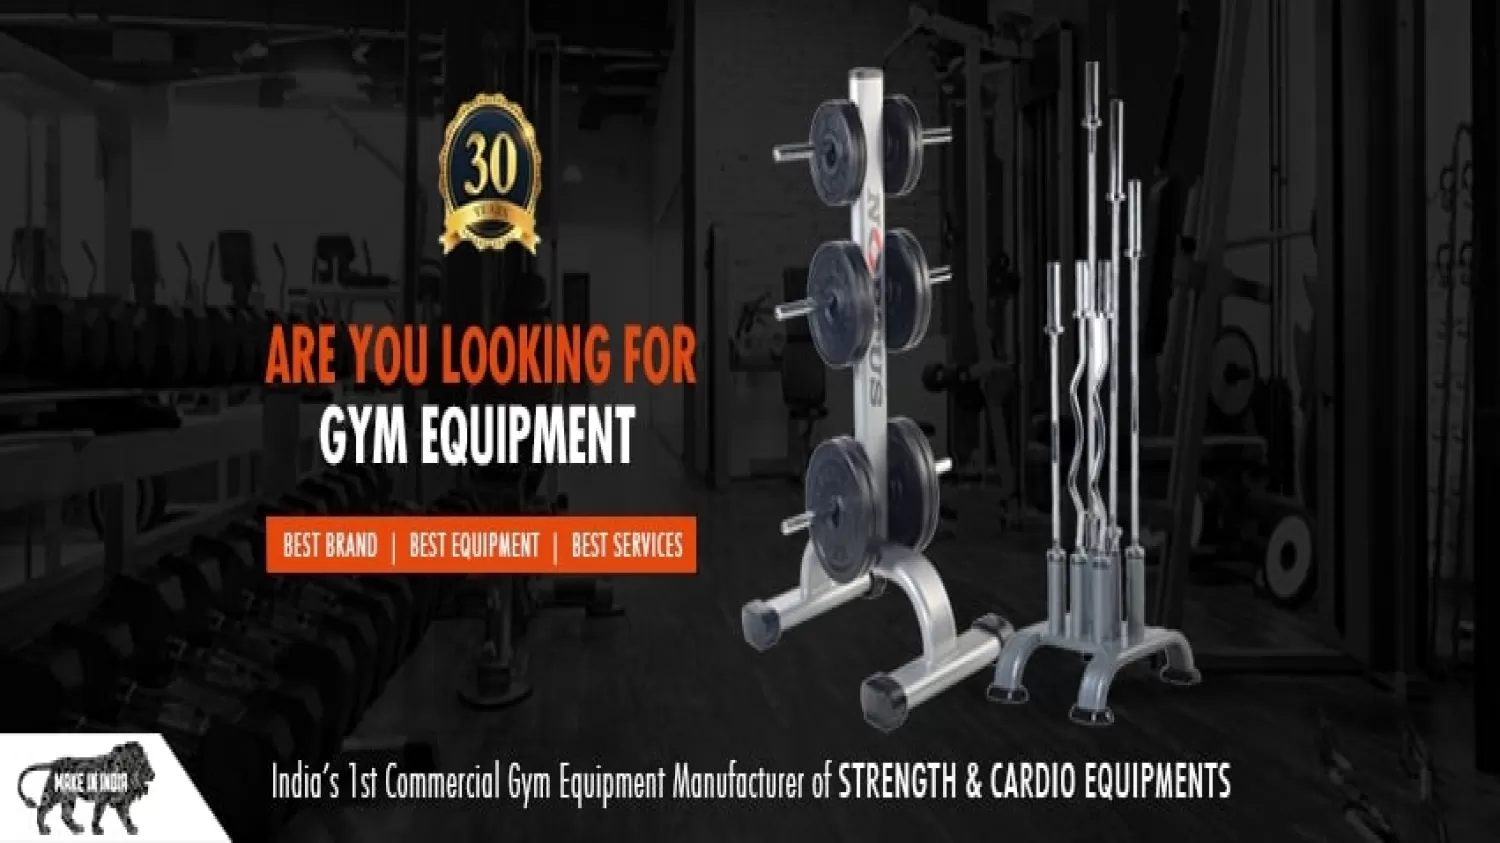 How to Use Different Kinds of Gym Equipment?